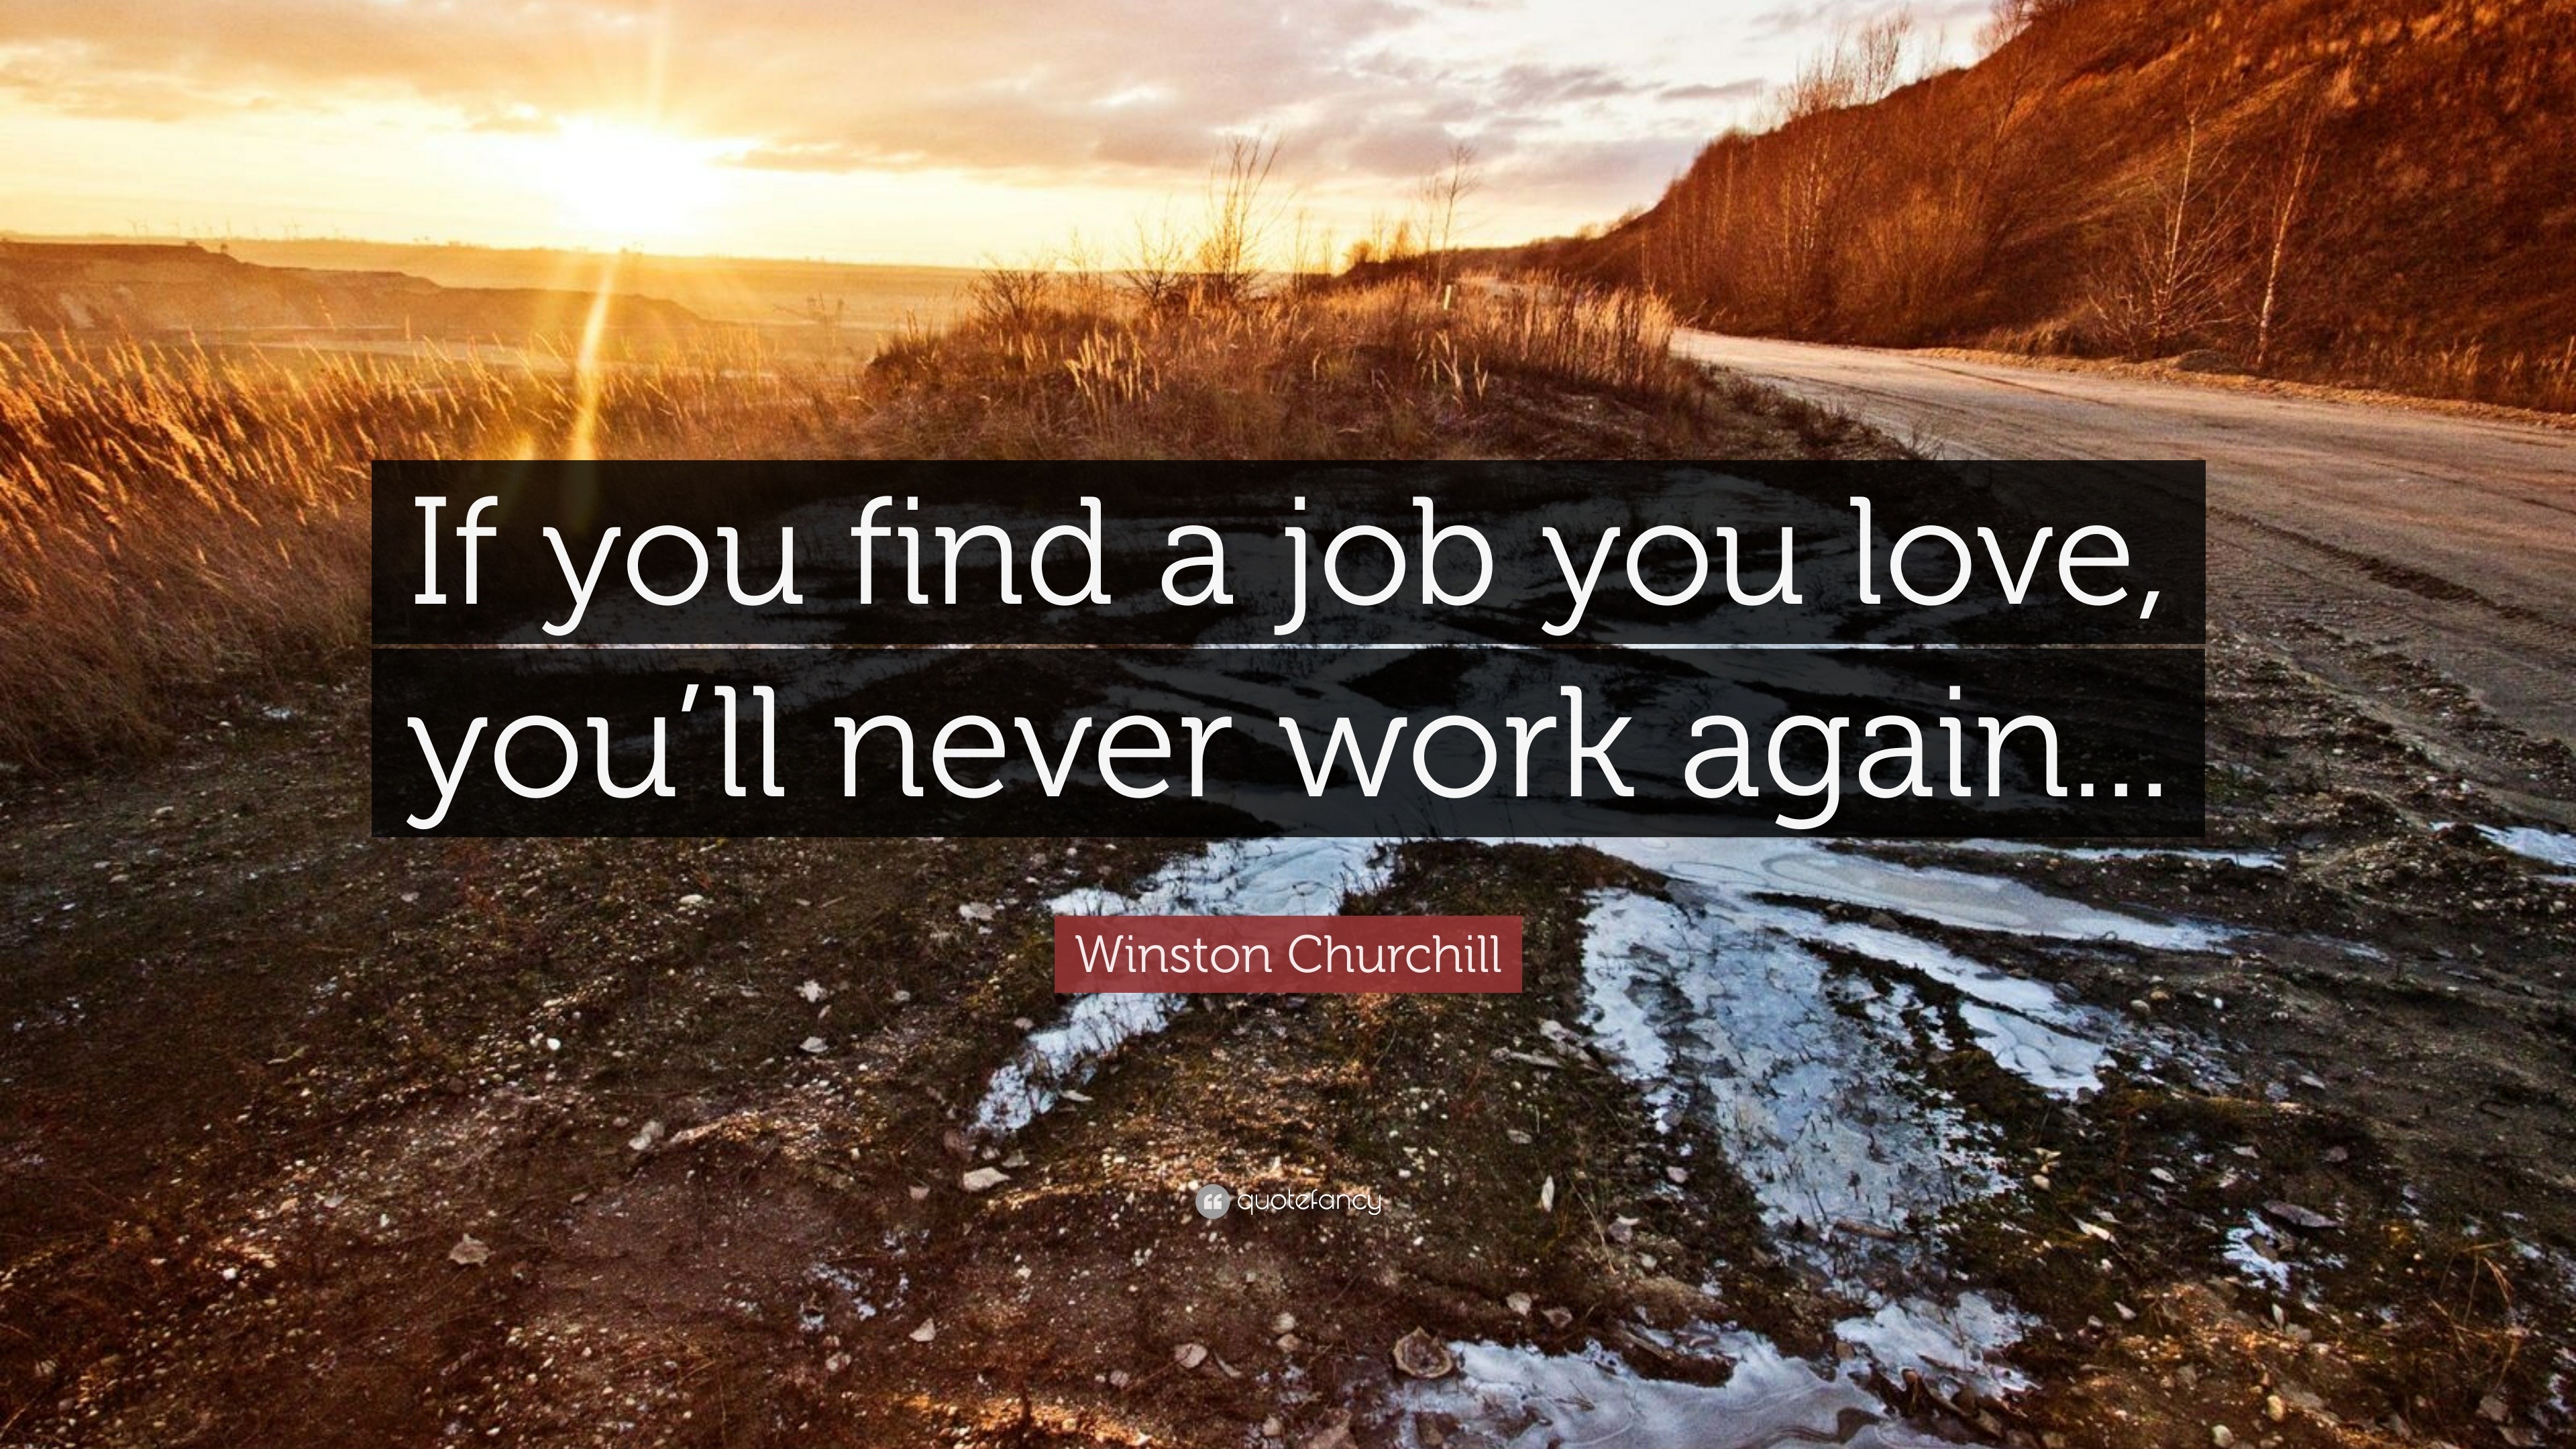 Winston Churchill Quote: “If you find a job you love, you’ll never work